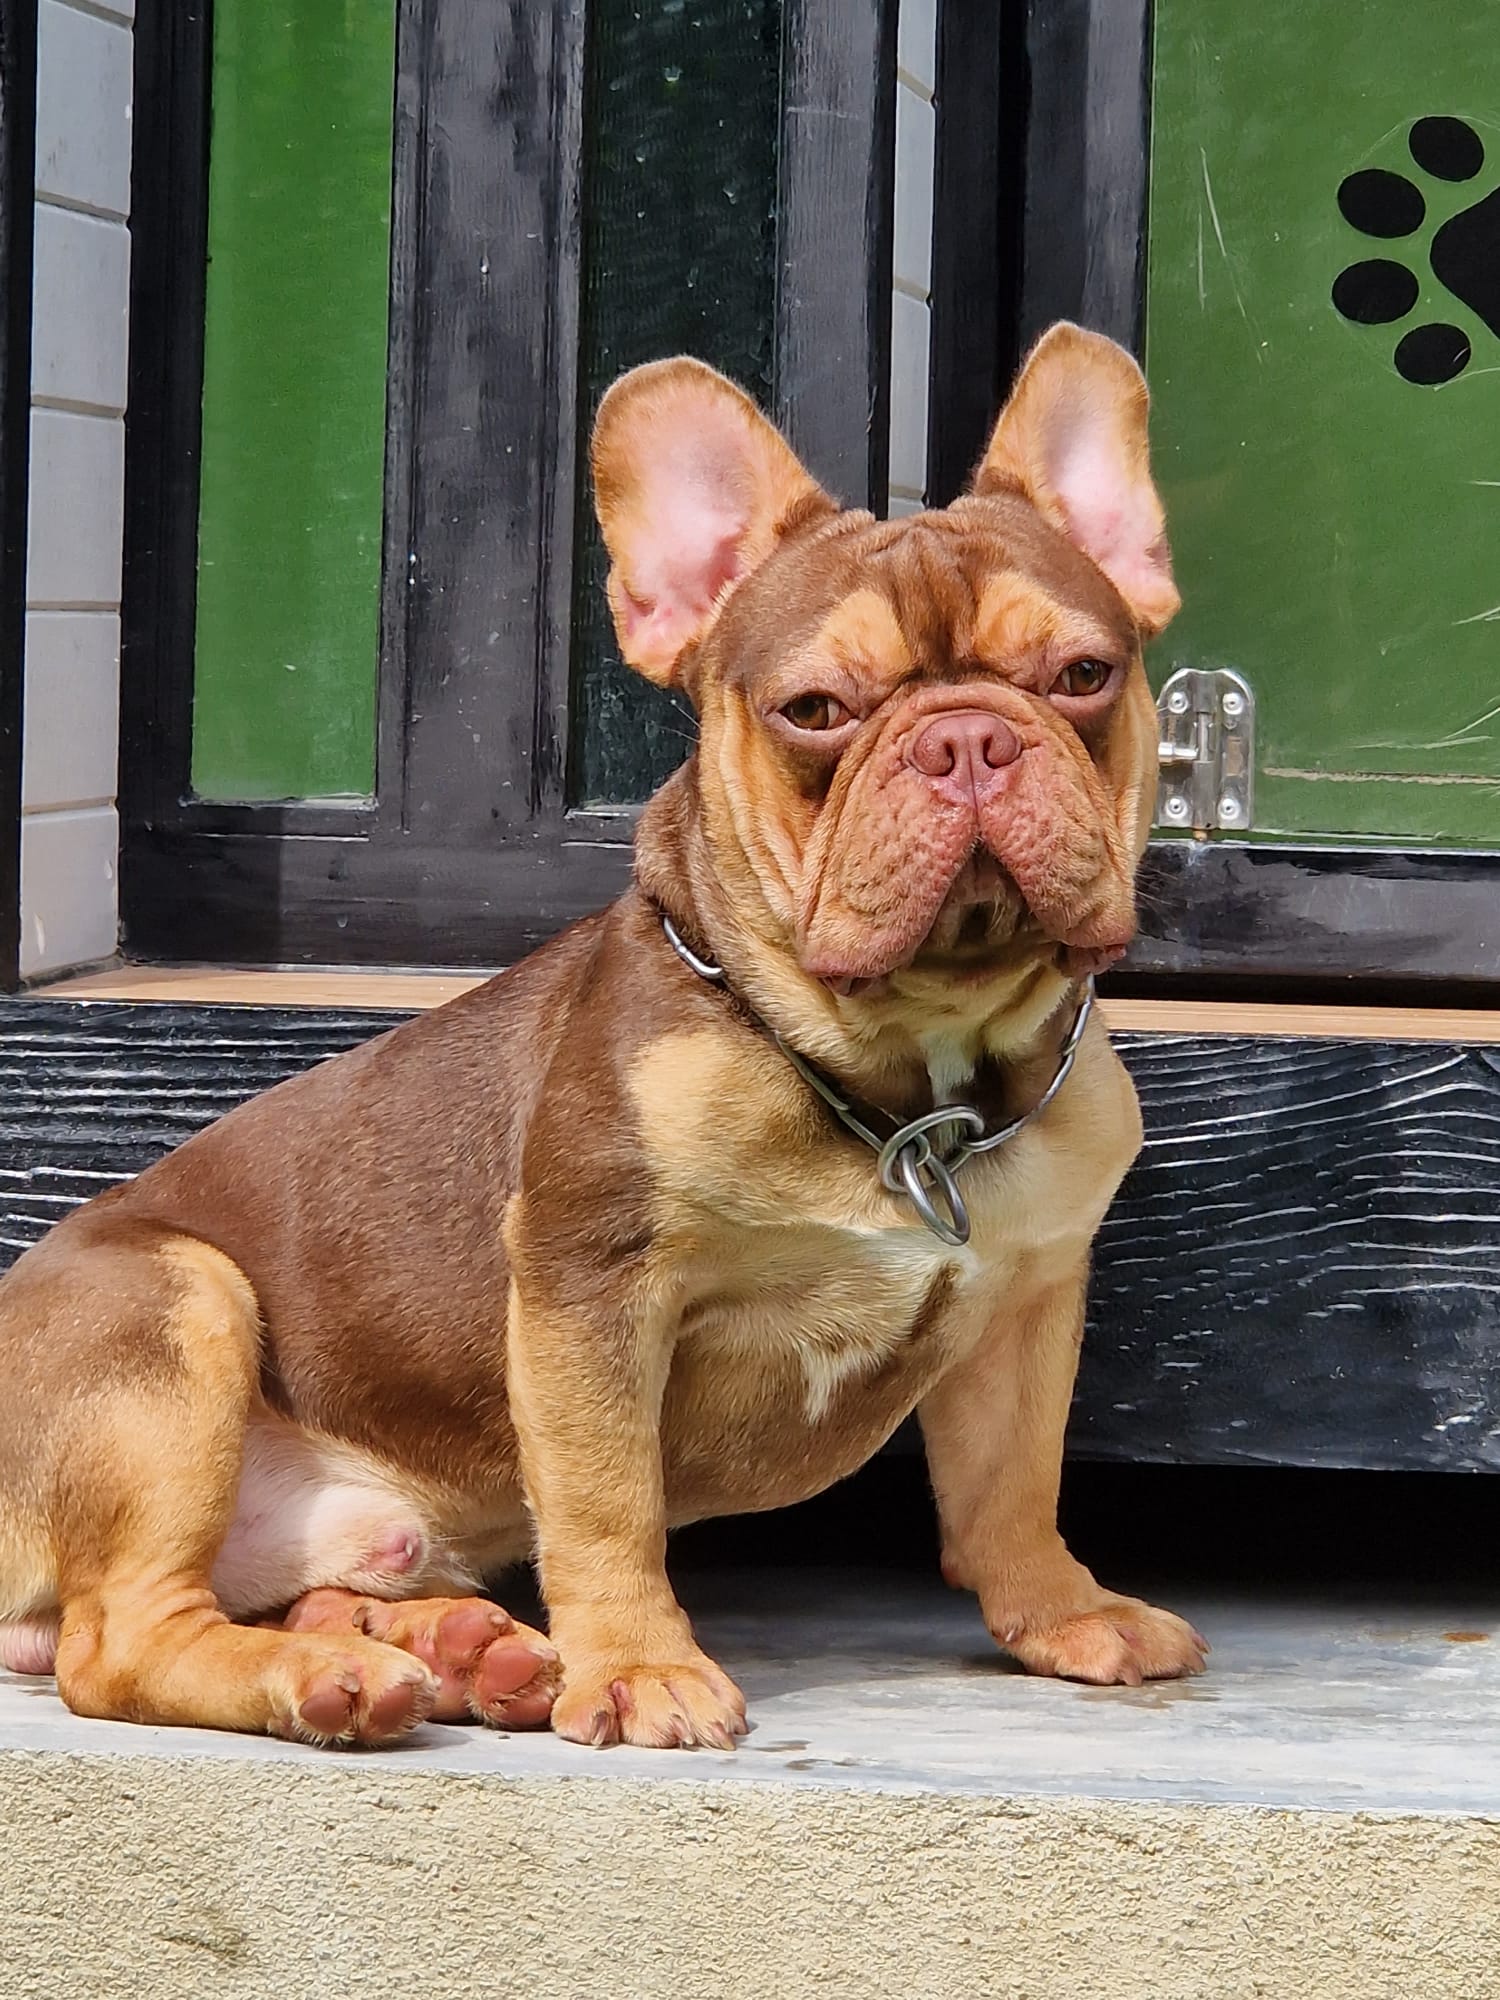 A French Bulldog with a muscular build and attentive expression sitting at a doorstep.